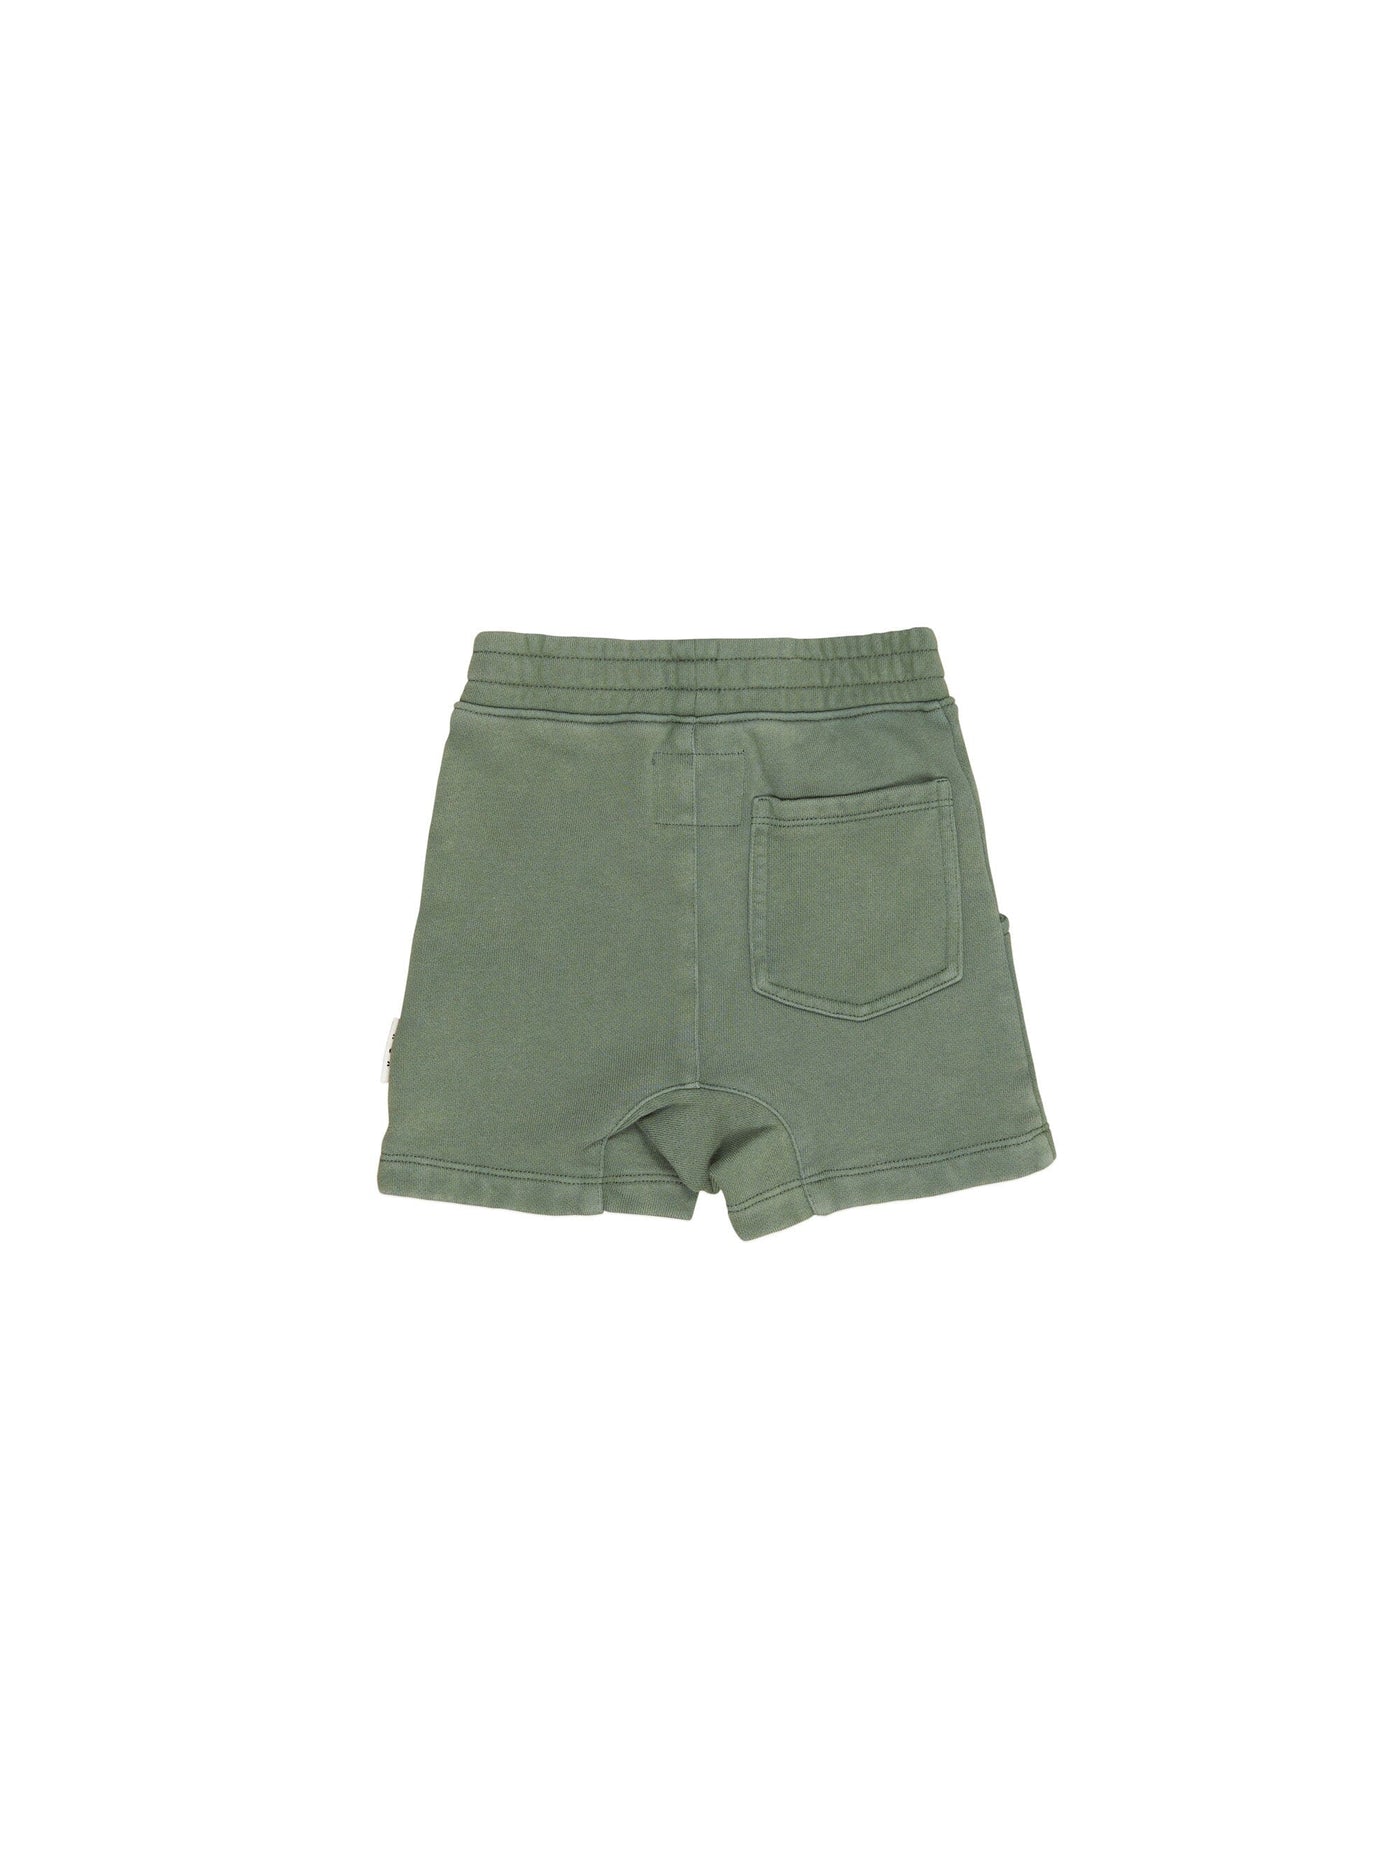 Huxbaby Vintage Green Slouch Short HB6152W24 Shorts Huxbaby 